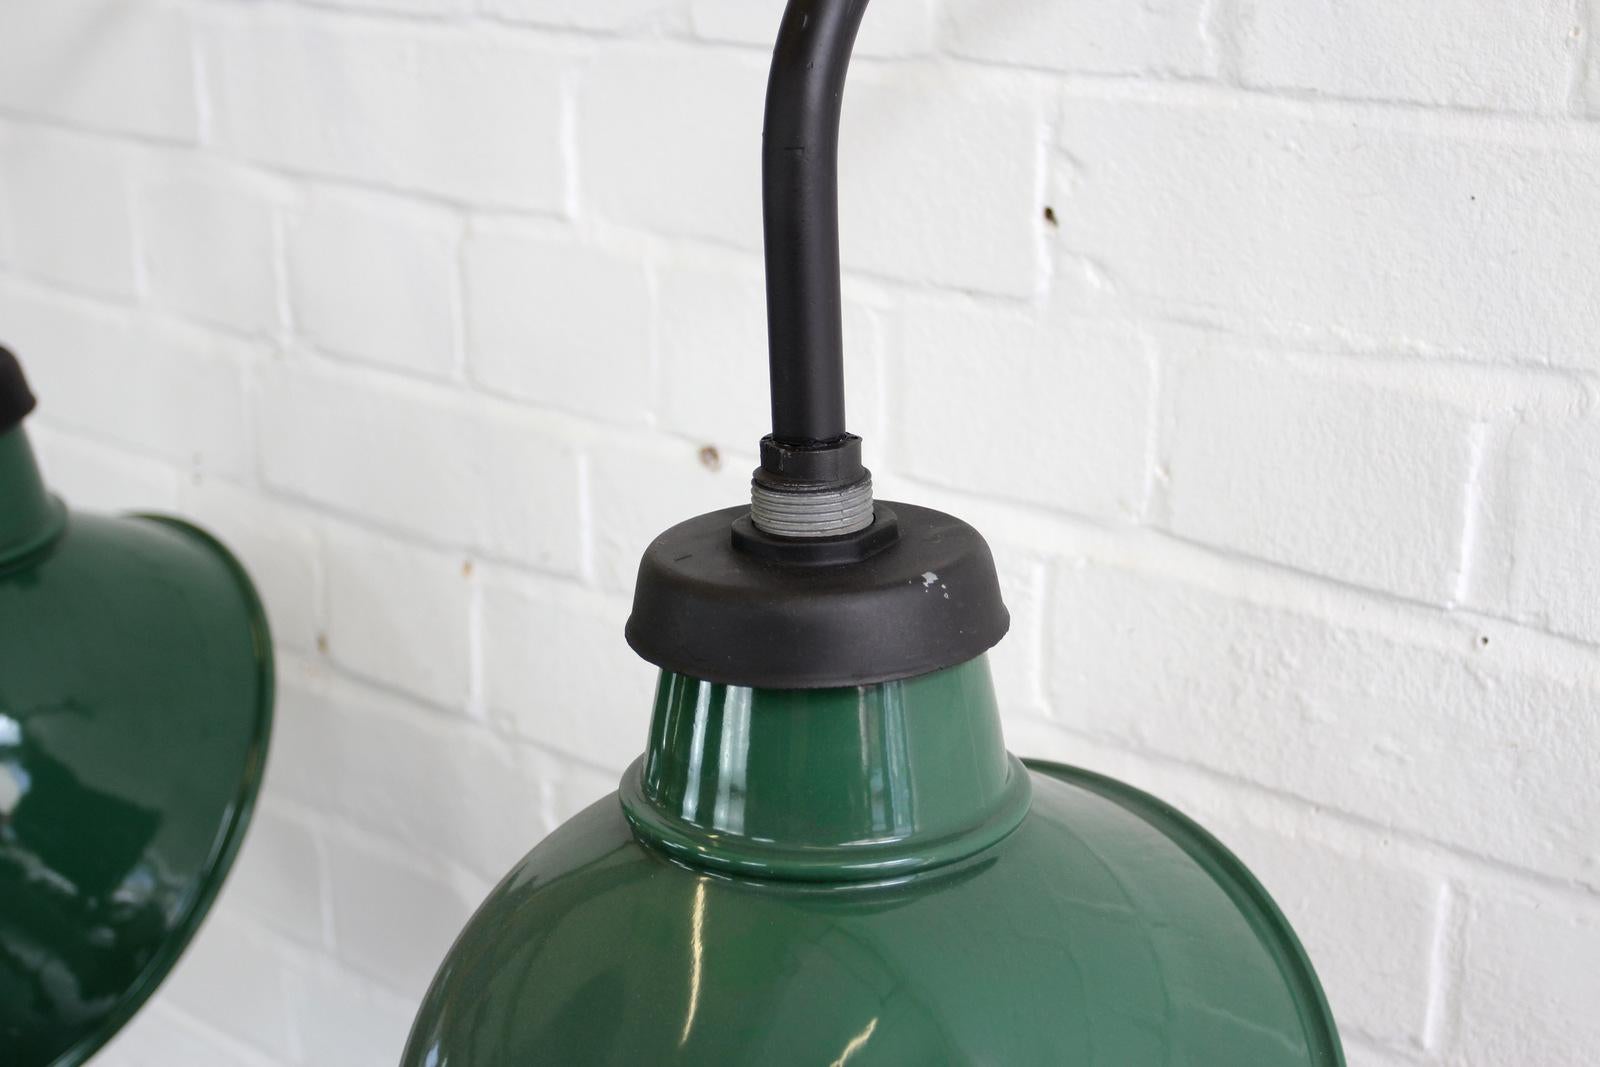 Mid-20th Century Wall-Mounted Industrial Lamps by Crossland, circa 1950s